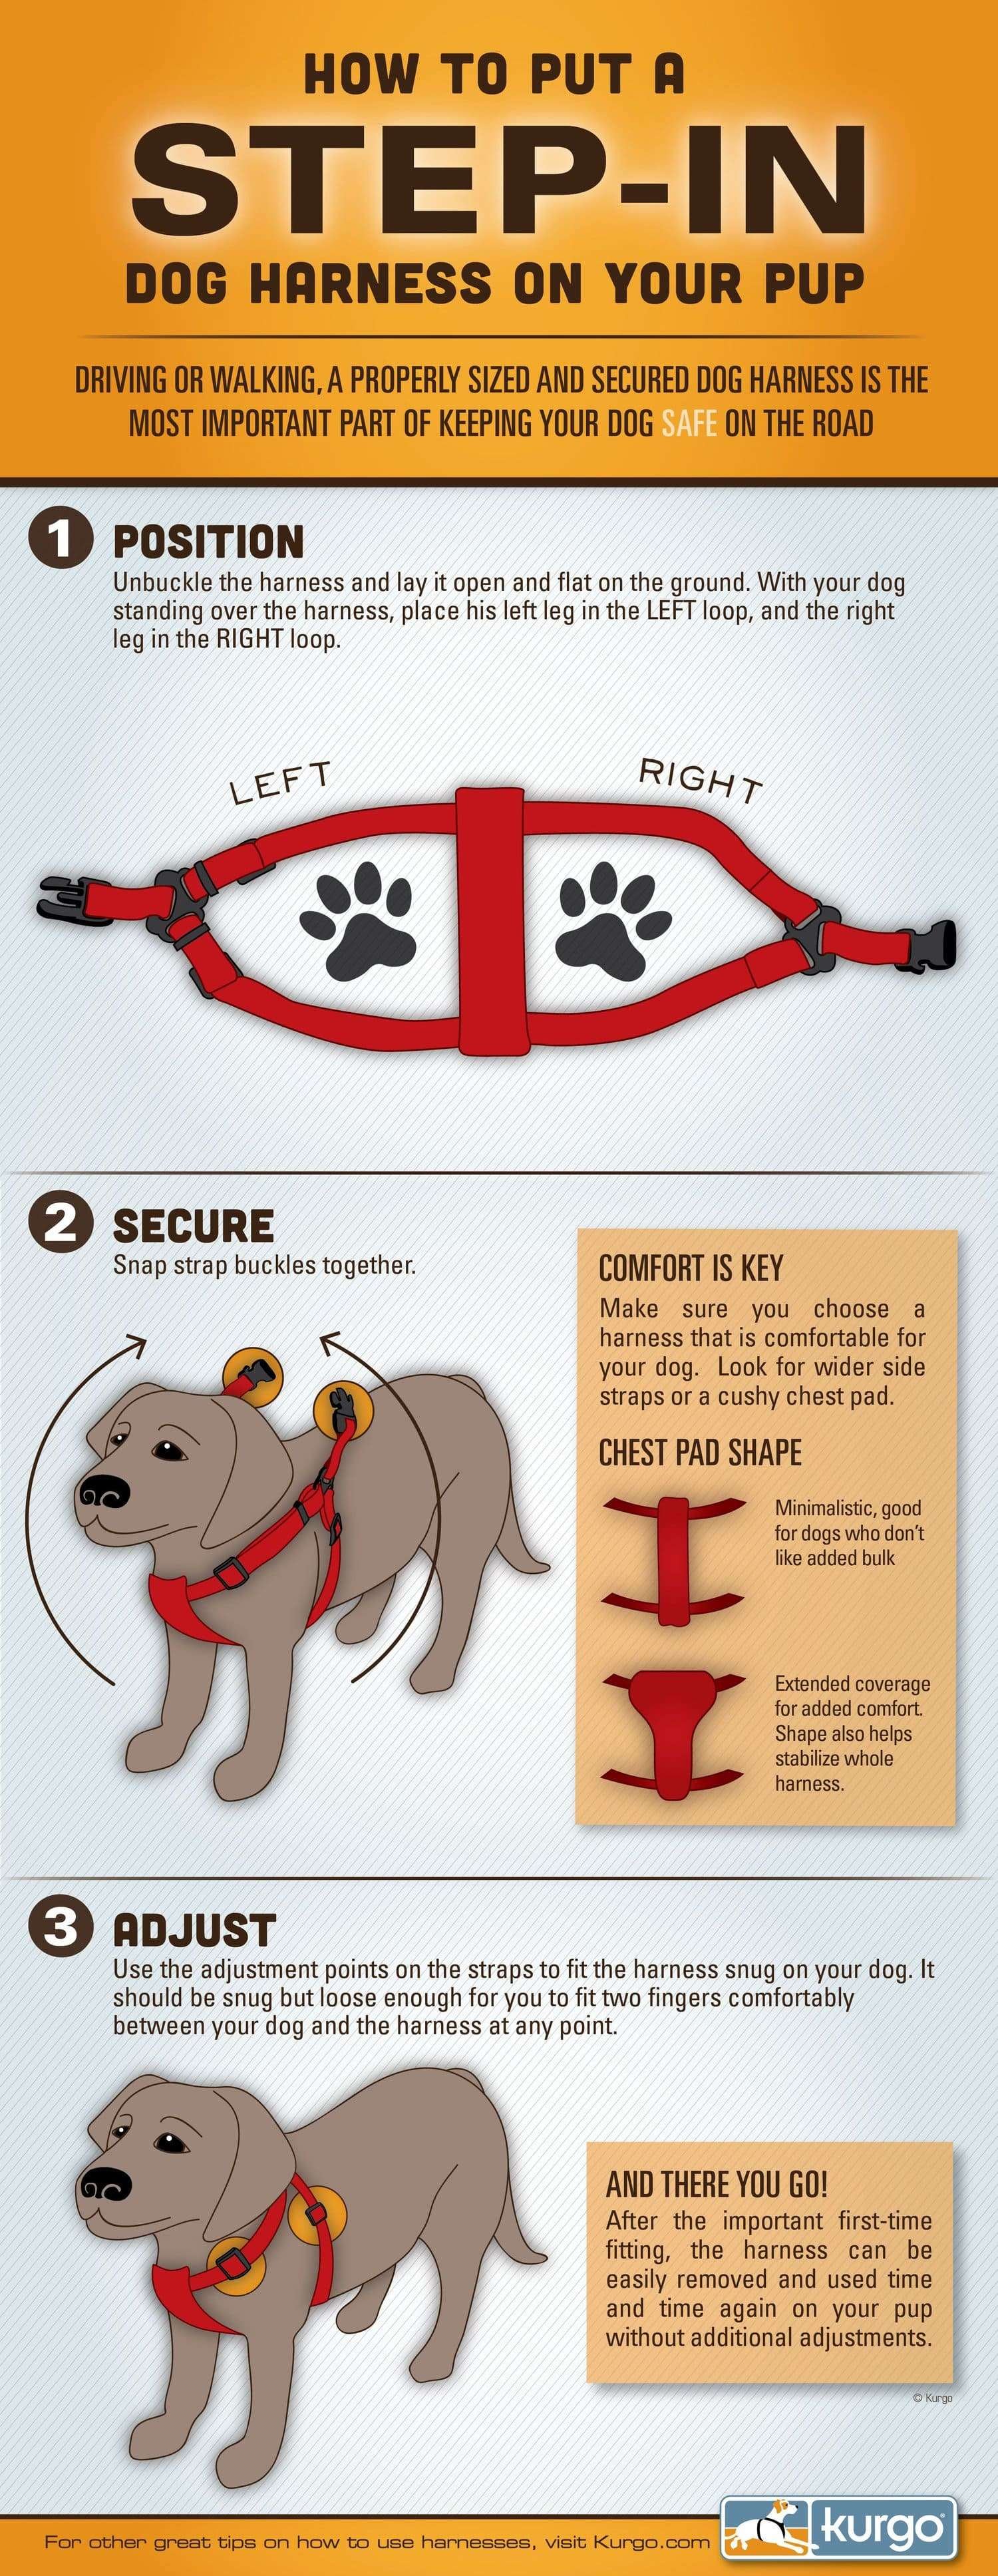 how to fit a step-in harness